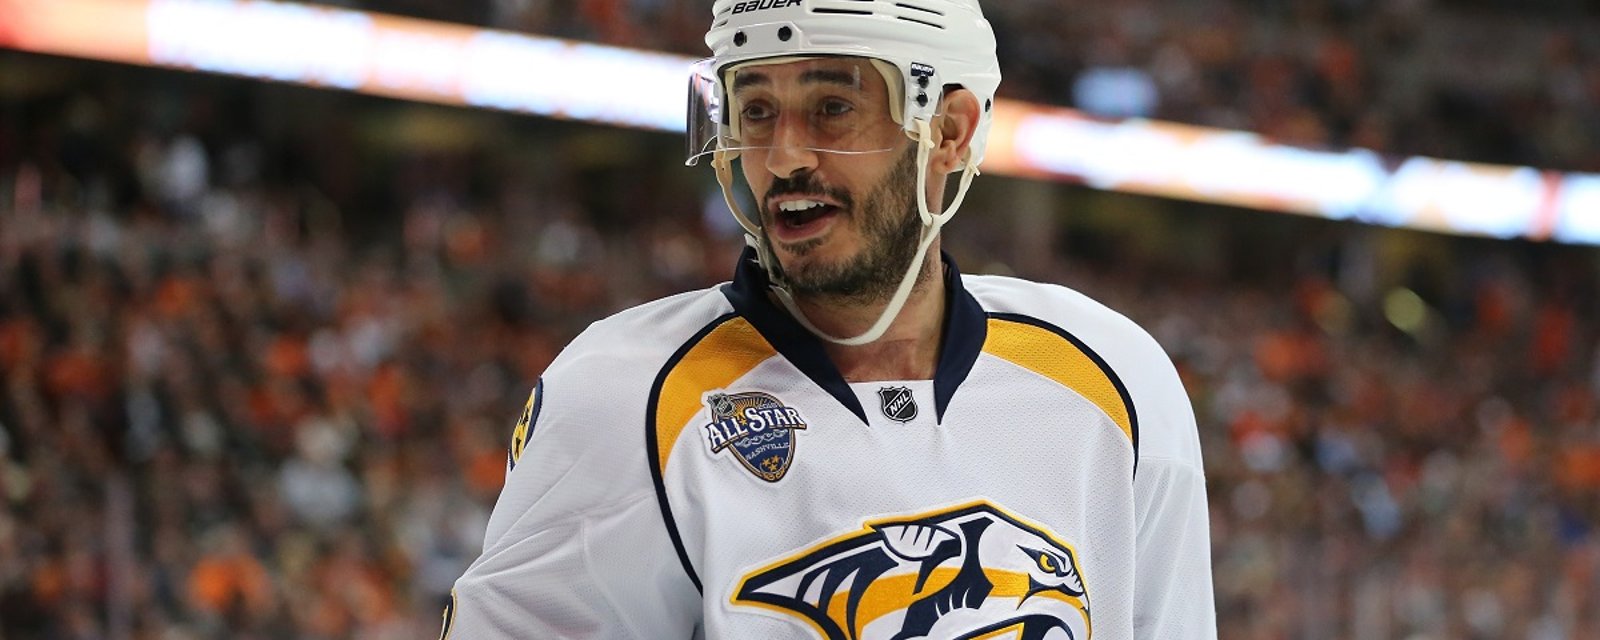 Montreal radio host reveals a shocking story about Mike Ribeiro.